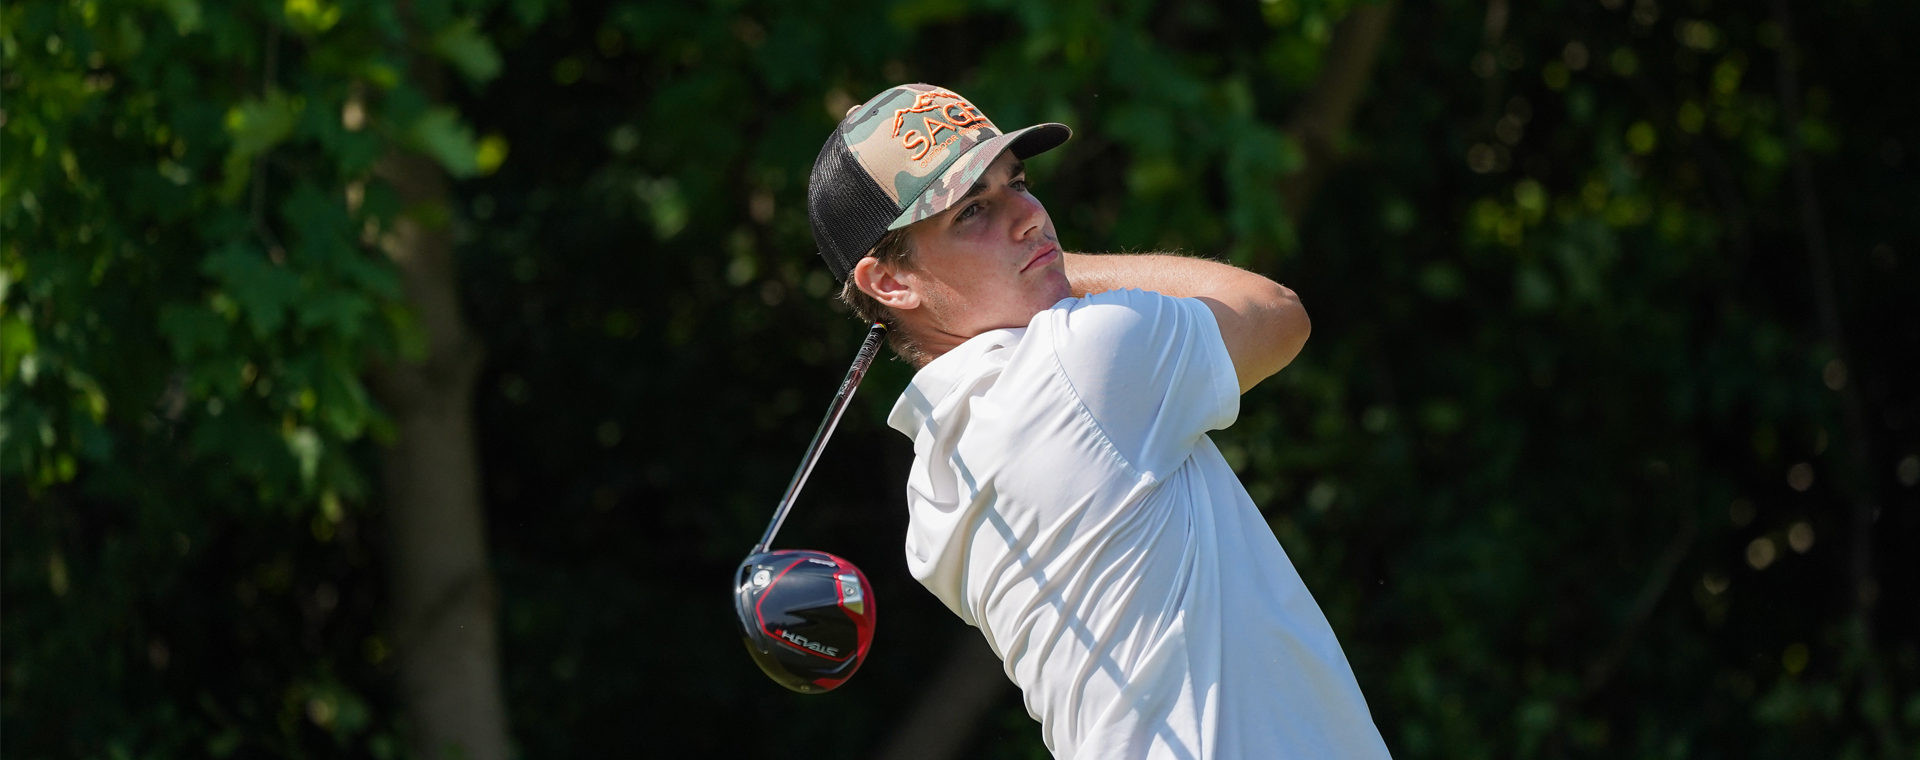 Claycomb leads after round one the 105th Western Junior